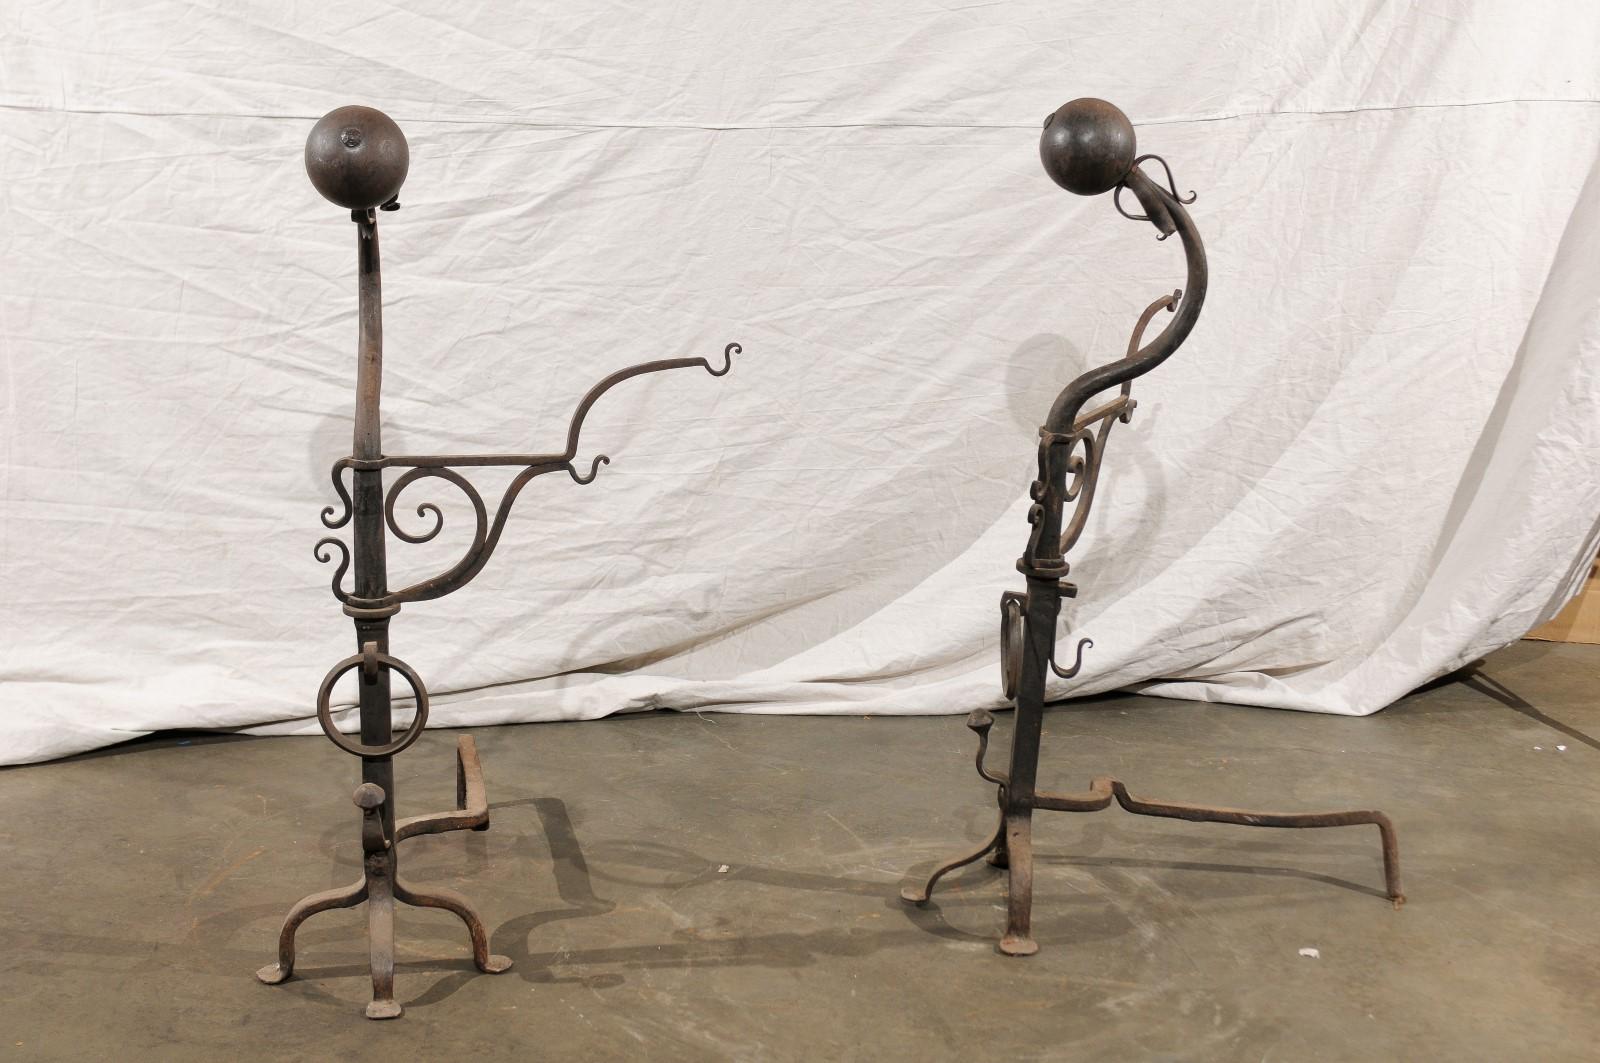 Samuel Yellin style pair of 20th century jumbo iron andirons with cooking arms
In the style of Samuel Yellin.